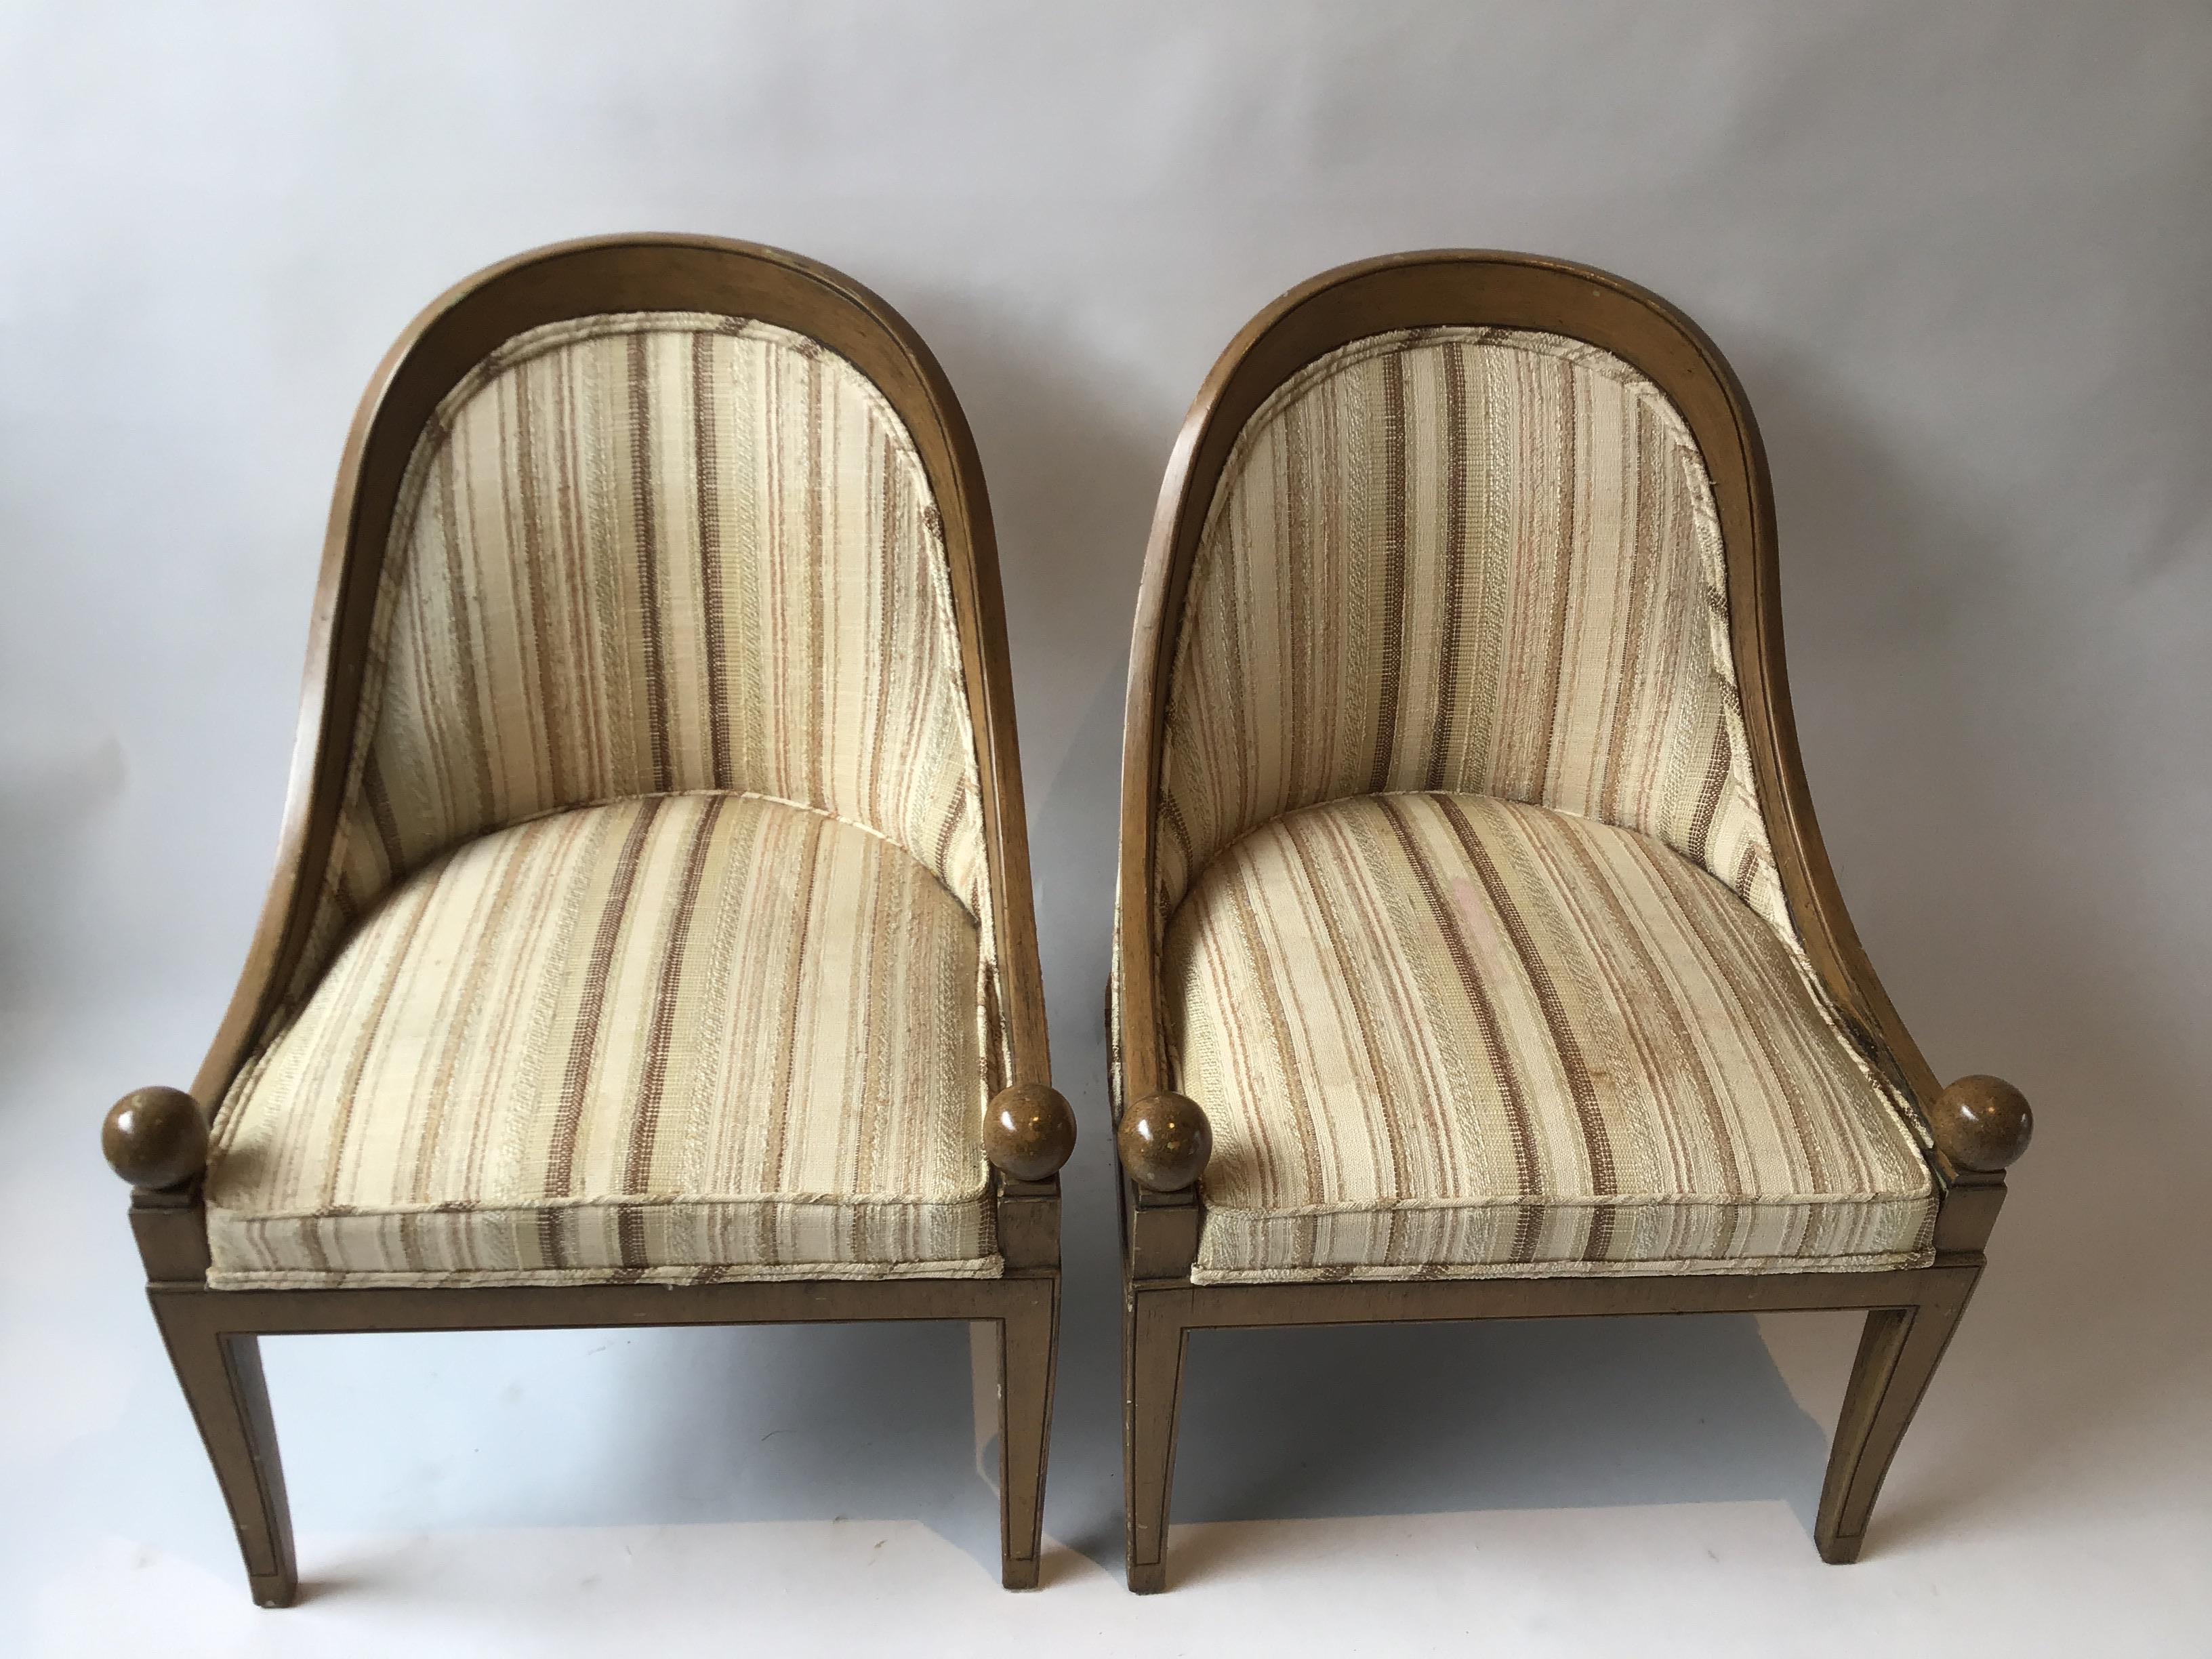 Pair of 1960s wood classical spoon back chairs. Needs reupholstering.